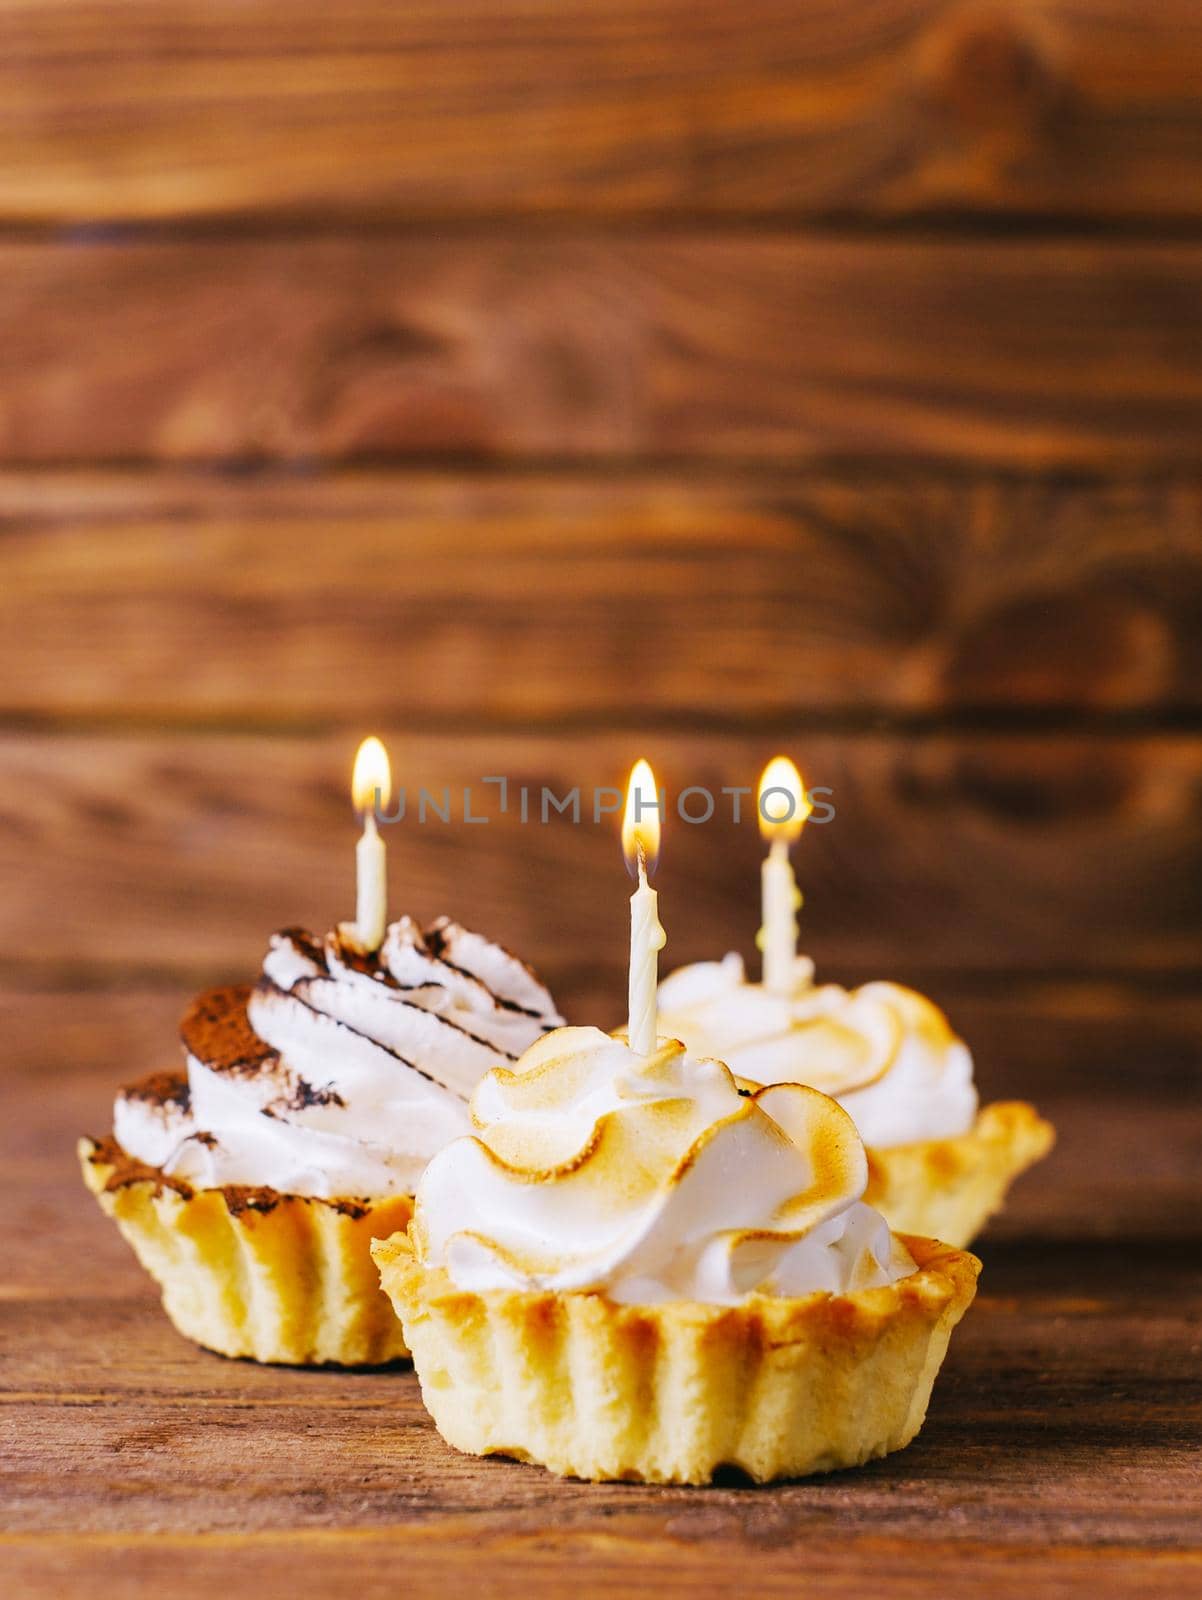 Birthday delicious cream cupcakes with candles on a wooden table.